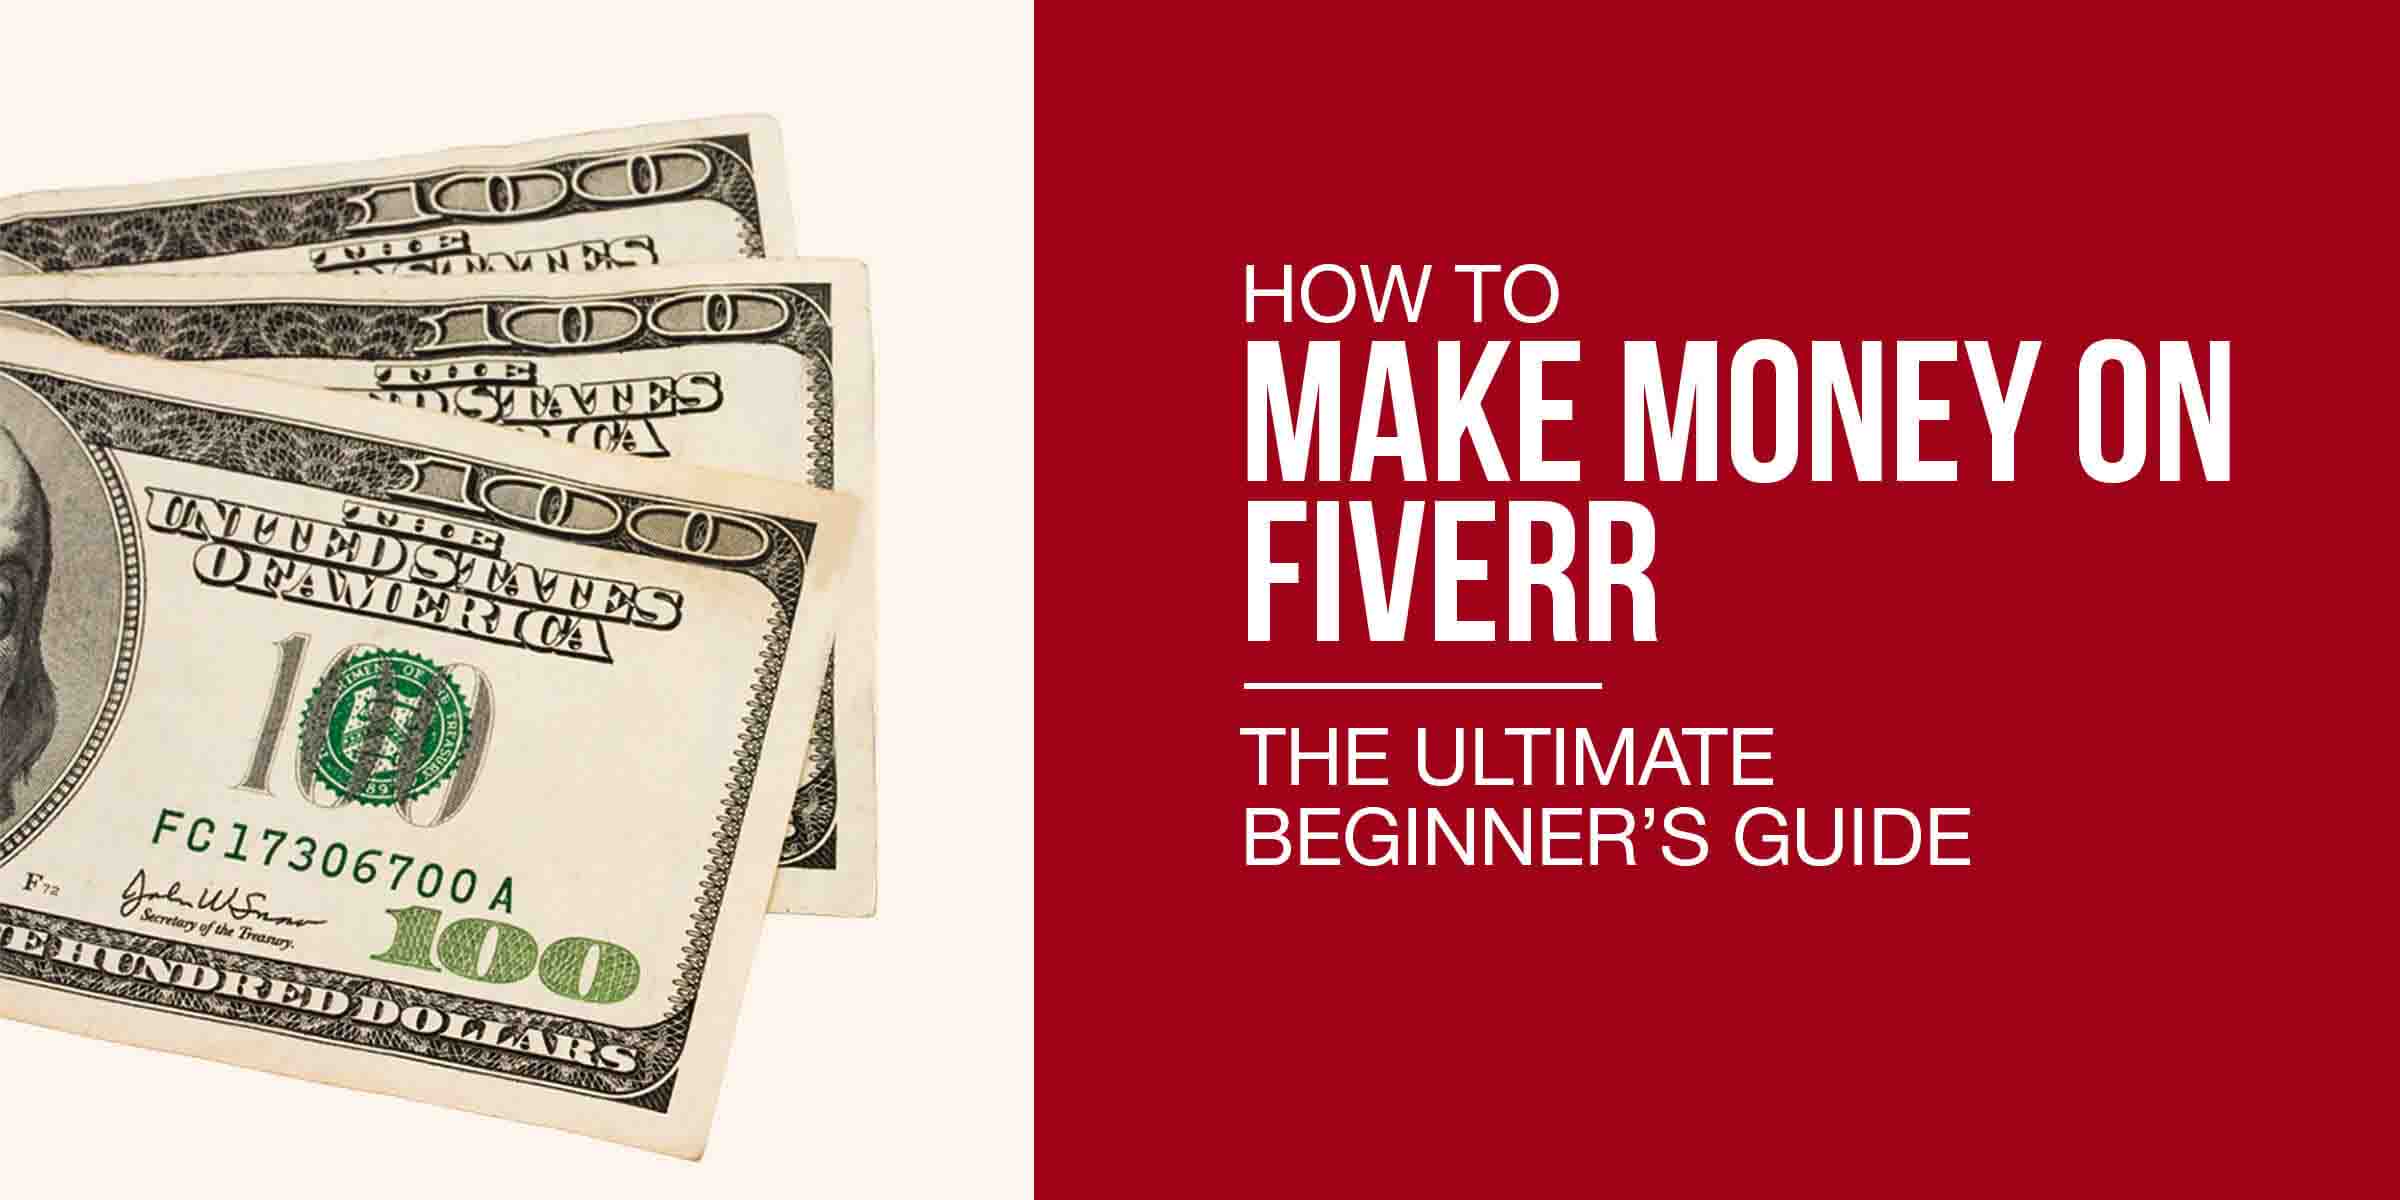 Can You Really Make Money on Fiverr as a Beginner? Here’s What You Need to Know